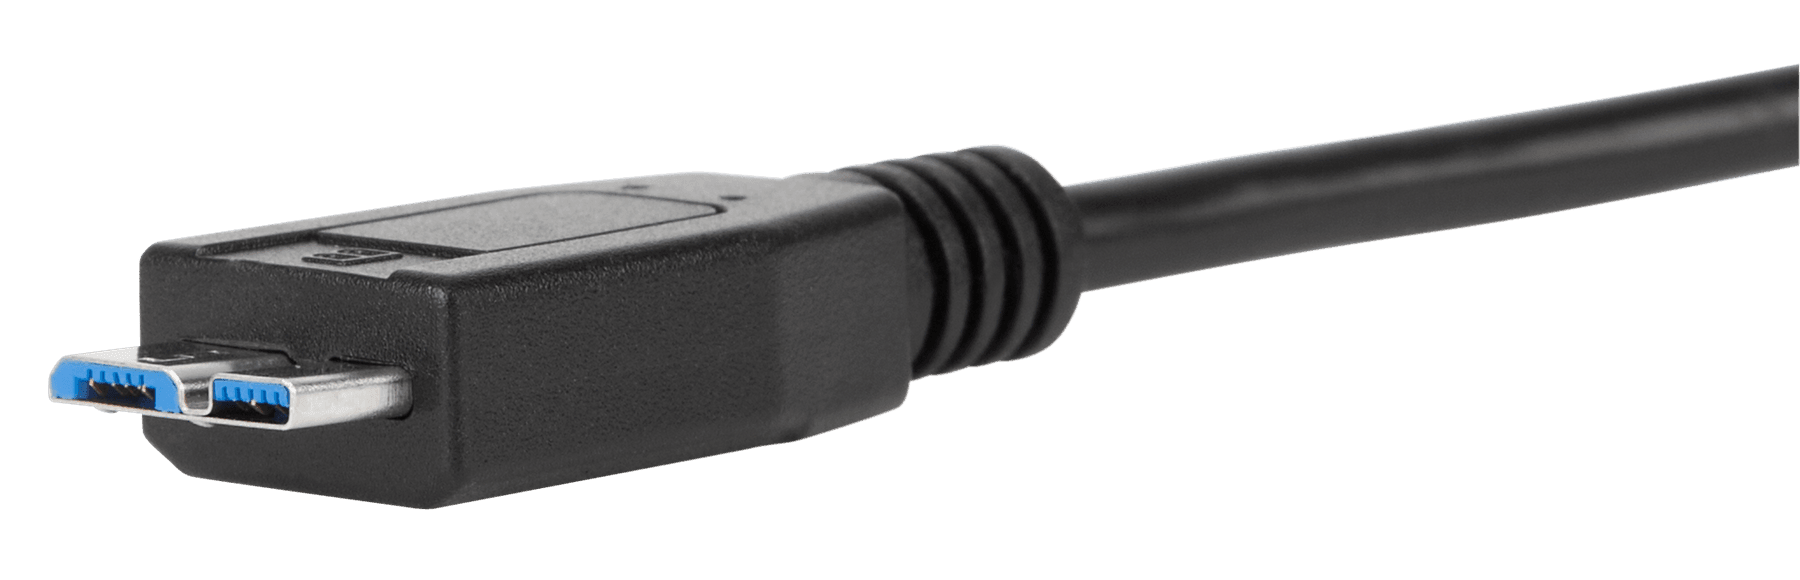 ChargeWorx USB Type-C to USB Type-A Male Cable CHA-CX4861RG B&H